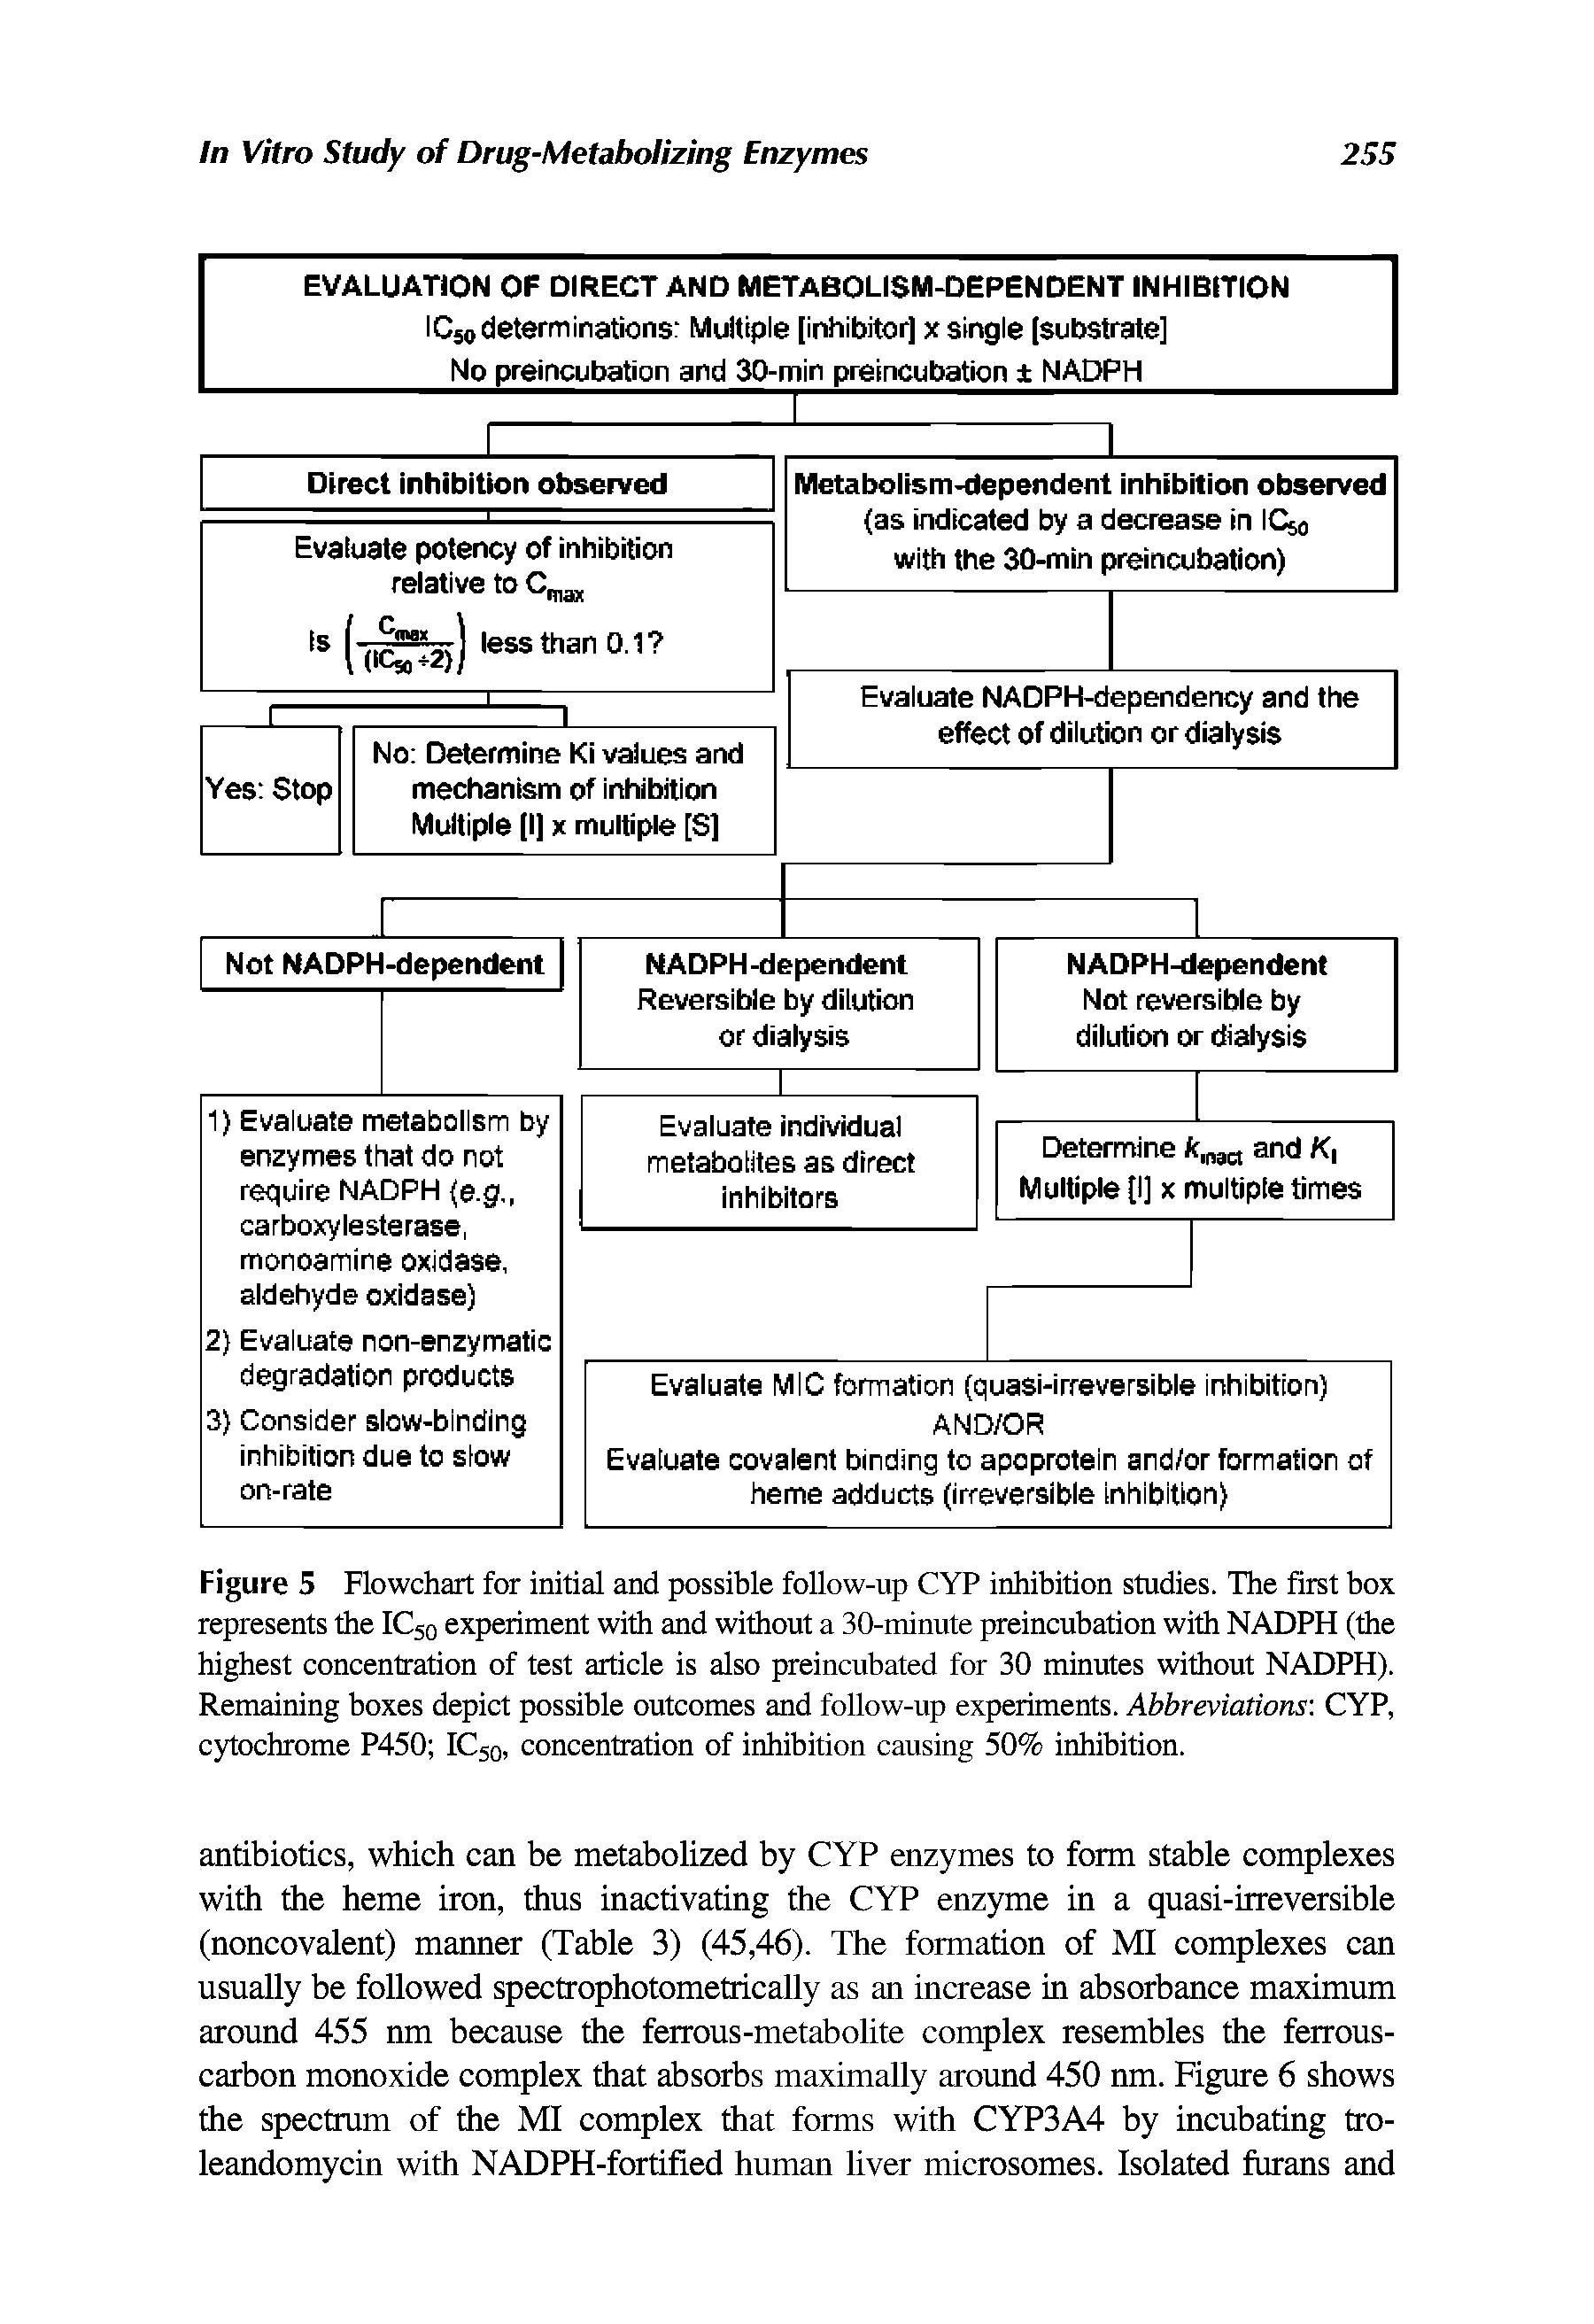 Figure 5 Flowchart for initial and possible follow-up CYP inhibition studies. The first box represents the IC50 experiment with and without a 30-minute preincubation with NADPH (the highest concentration of test article is also preincubated for 30 minutes without NADPH). Remaining boxes depict possible outcomes and follow-up experiments. Abbreviations CYP, cytochrome P450 IC50, concentration of inhibition causing 50% inhibition.